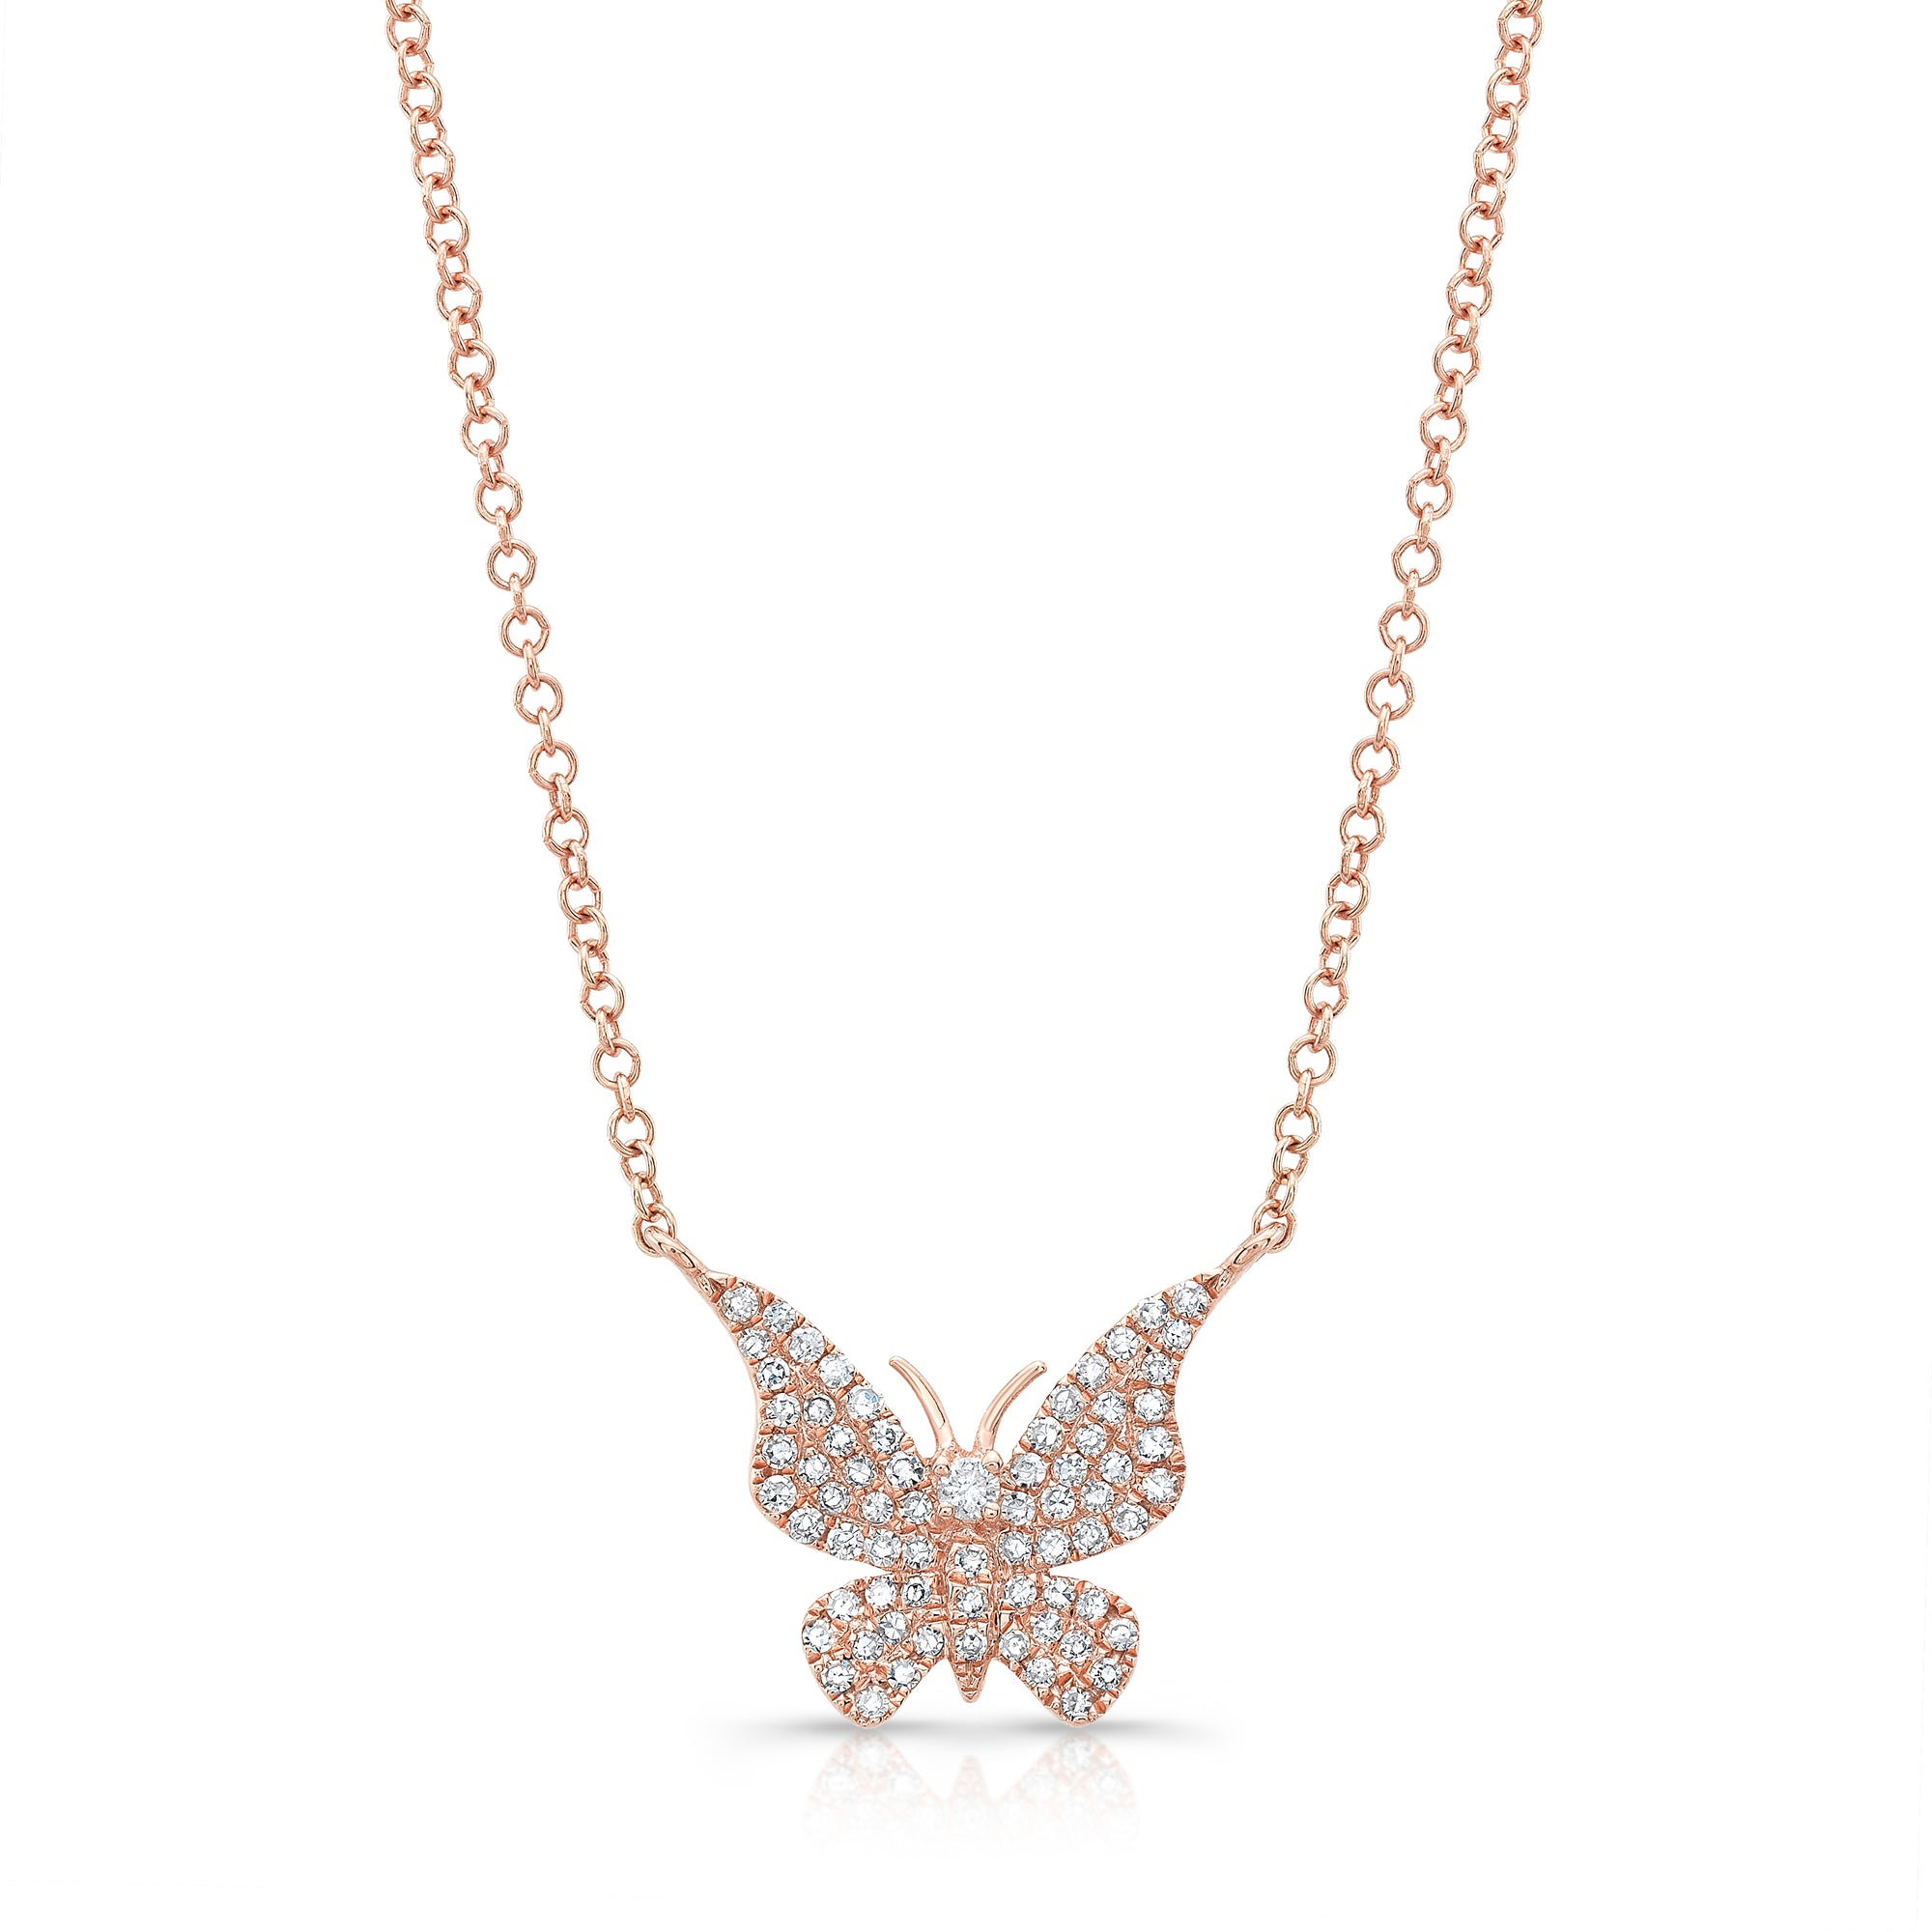 Diamond Butterfly Pendant Necklace -14K gold weighing 2.20 grams -70 round pave set diamonds totaling 0.20 carats